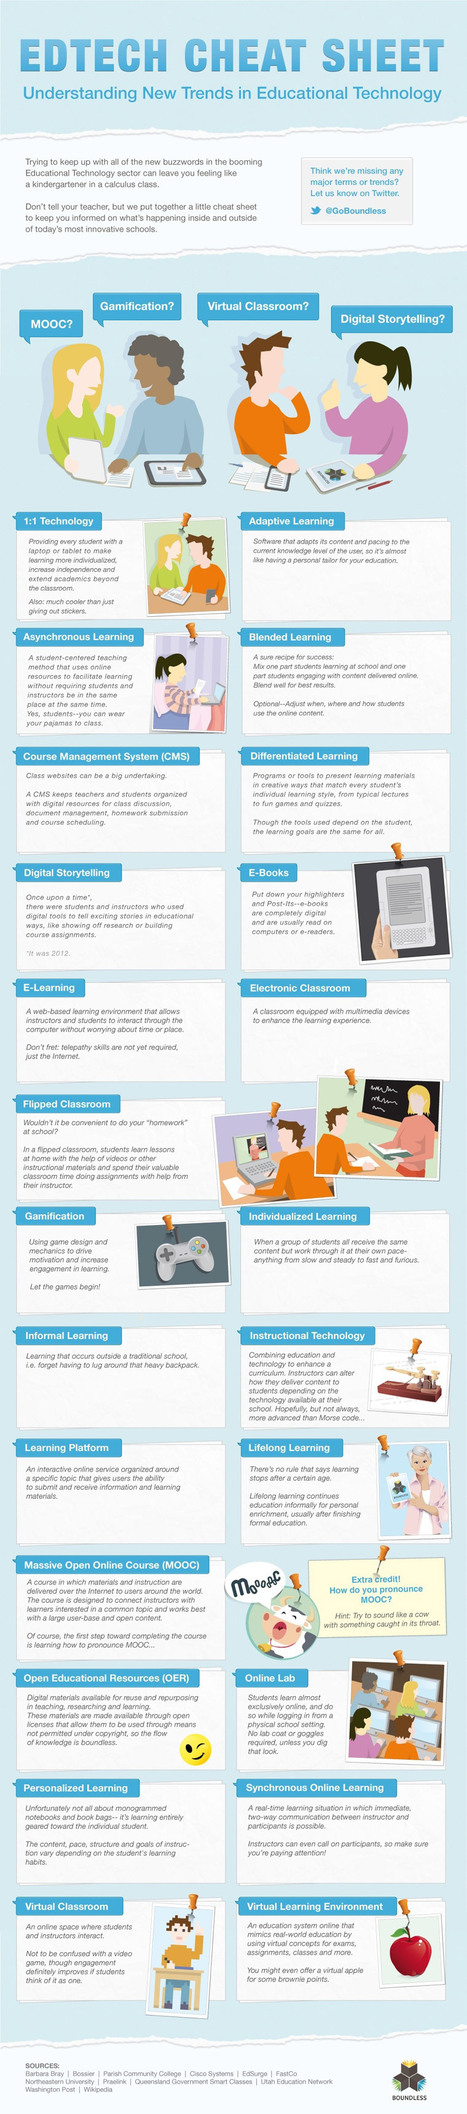 24 Ed-Tech Terms You Should Know [Infographic] | Latest Social Media News | Scoop.it